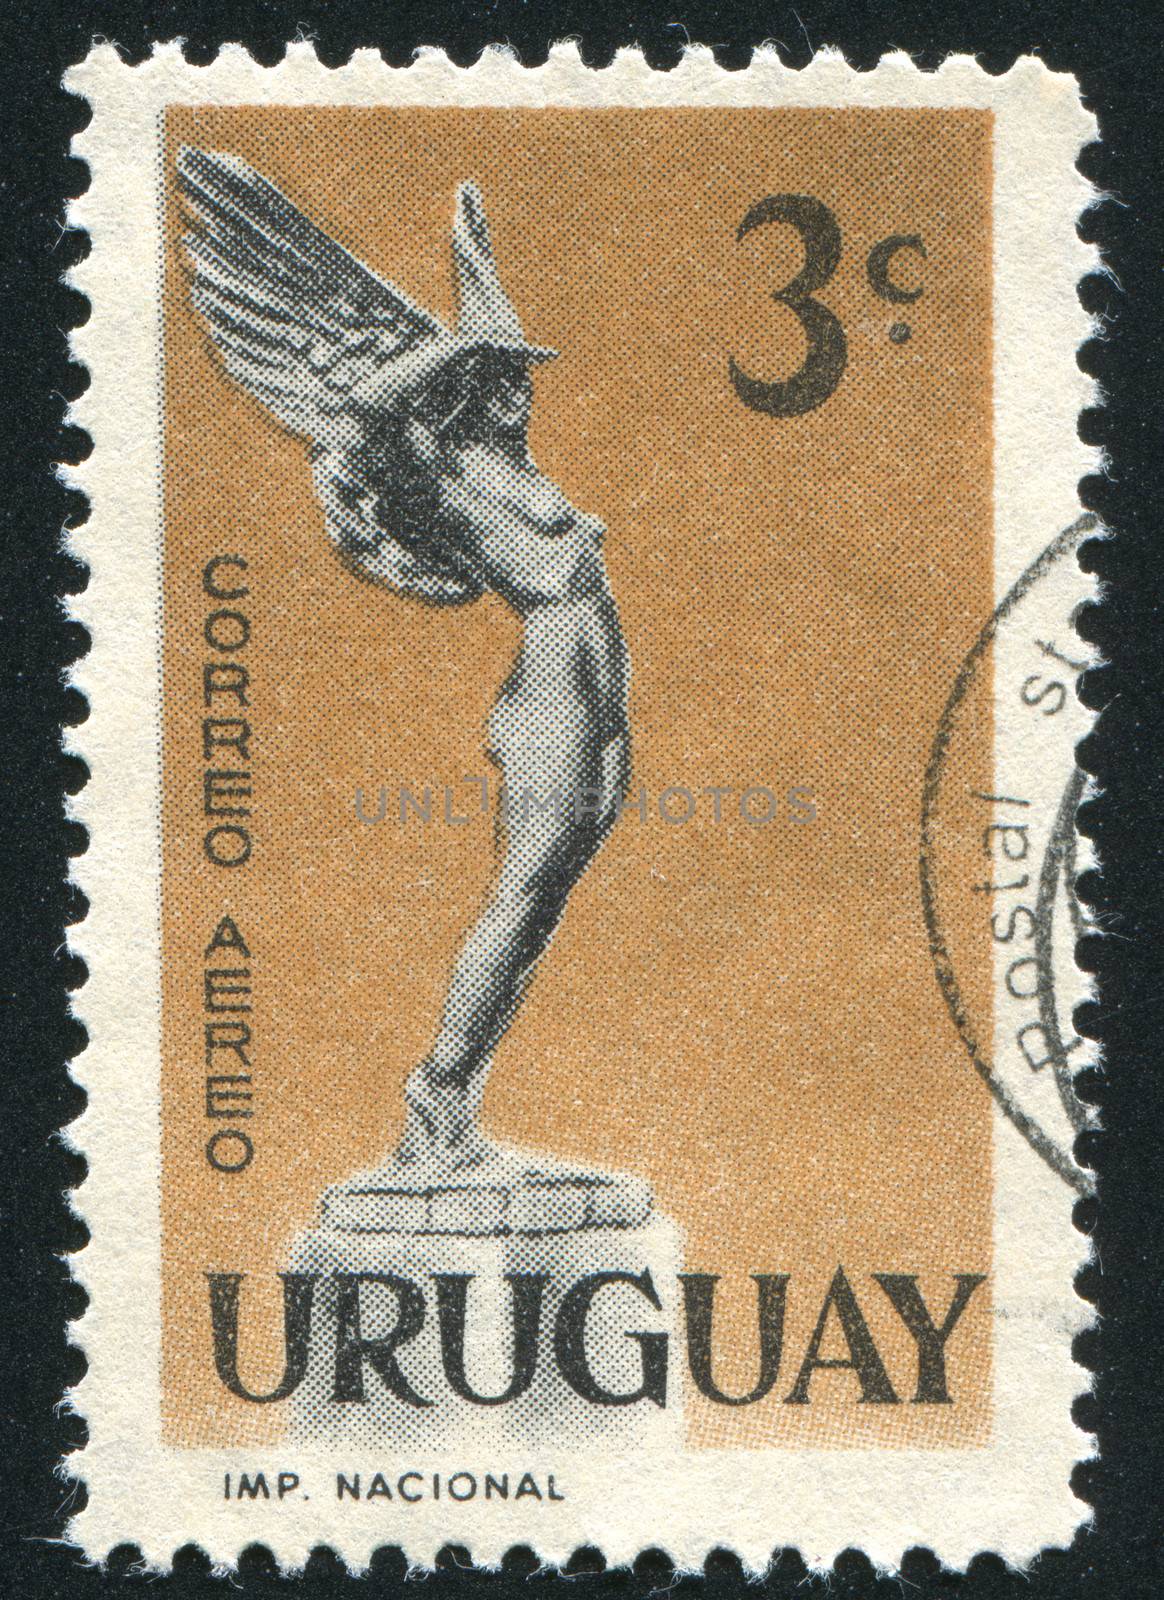 URUGUAY - CIRCA 1959: stamp printed by Uruguay, shows Flight from Monument to Fallen Aviators, circa 1959